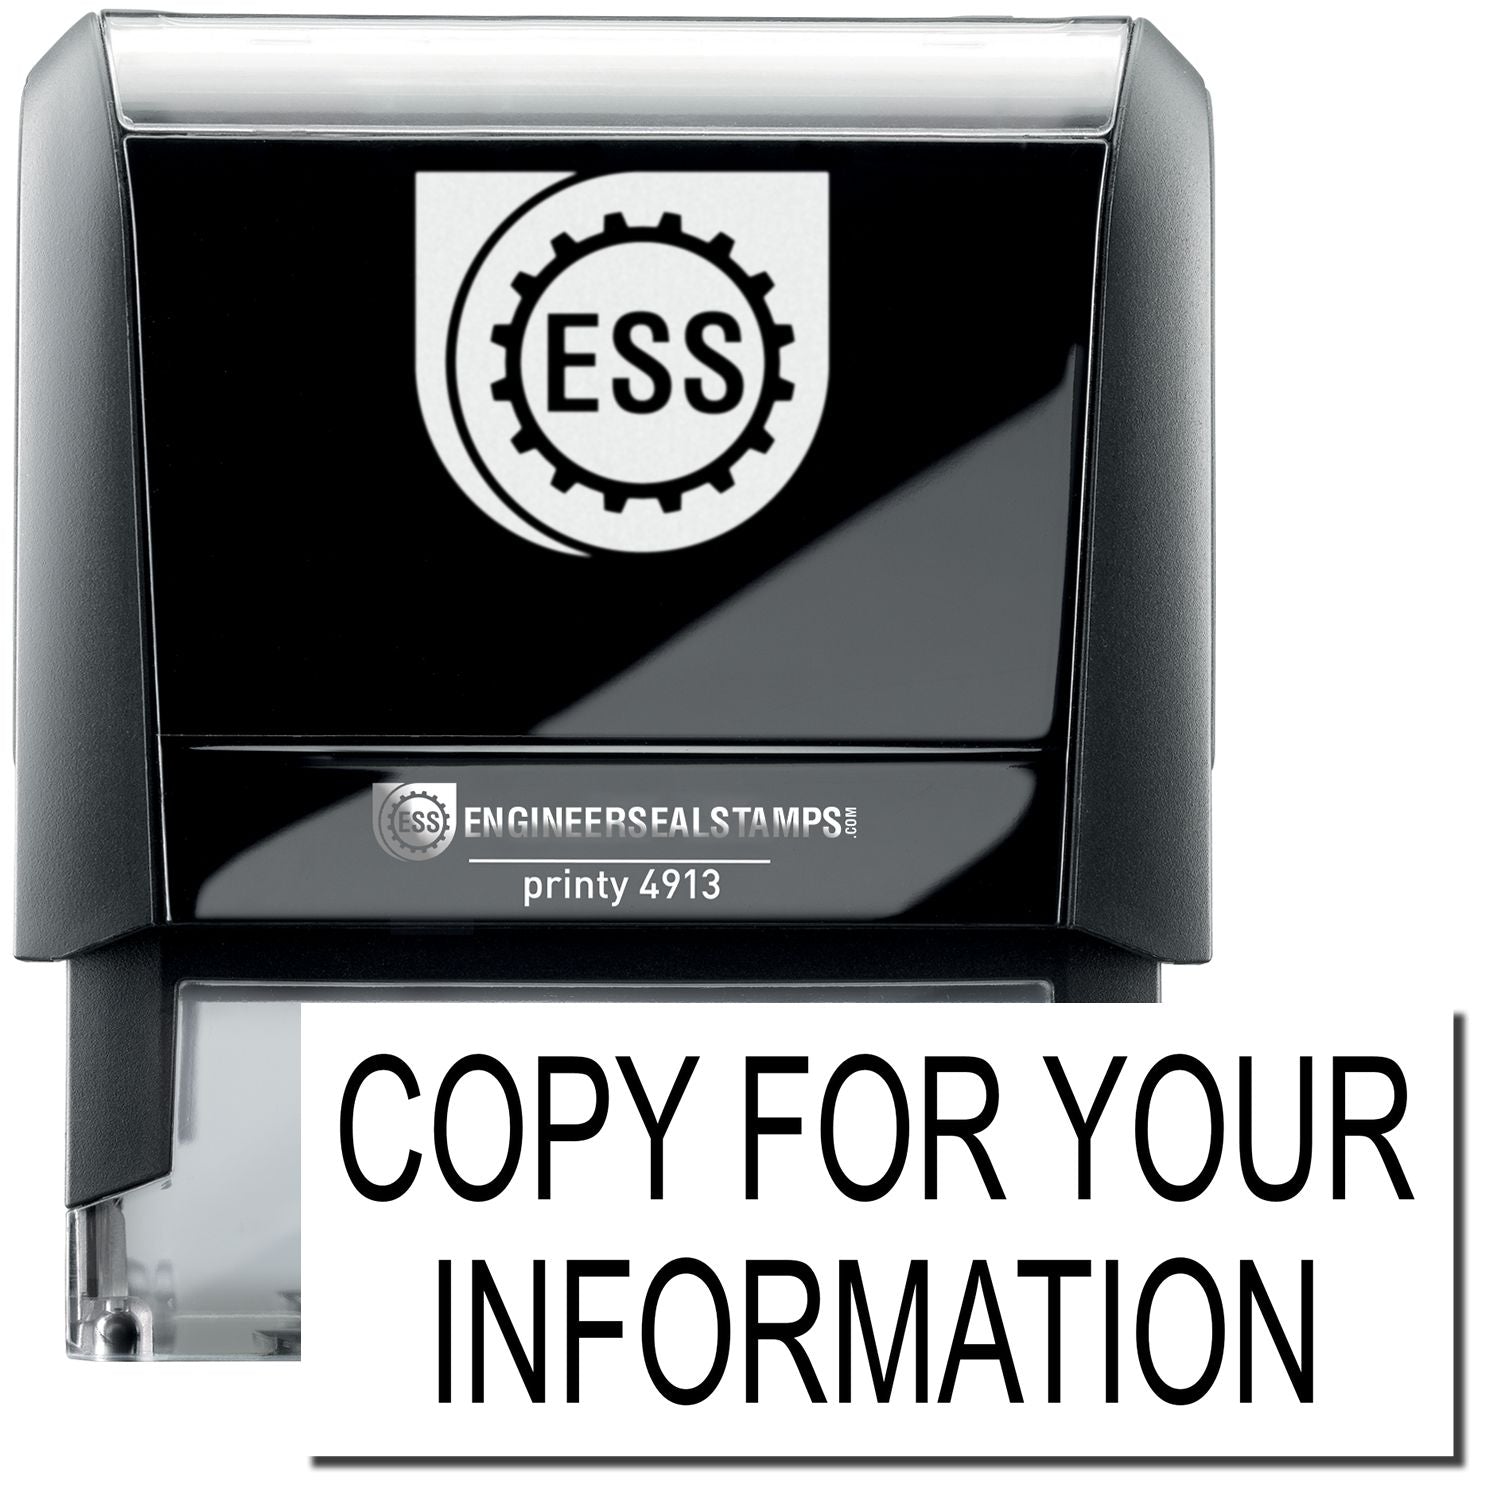 A large self-inking stamp with a stamped image showing the text "COPY FOR YOUR INFORMATION" in a large bold font.